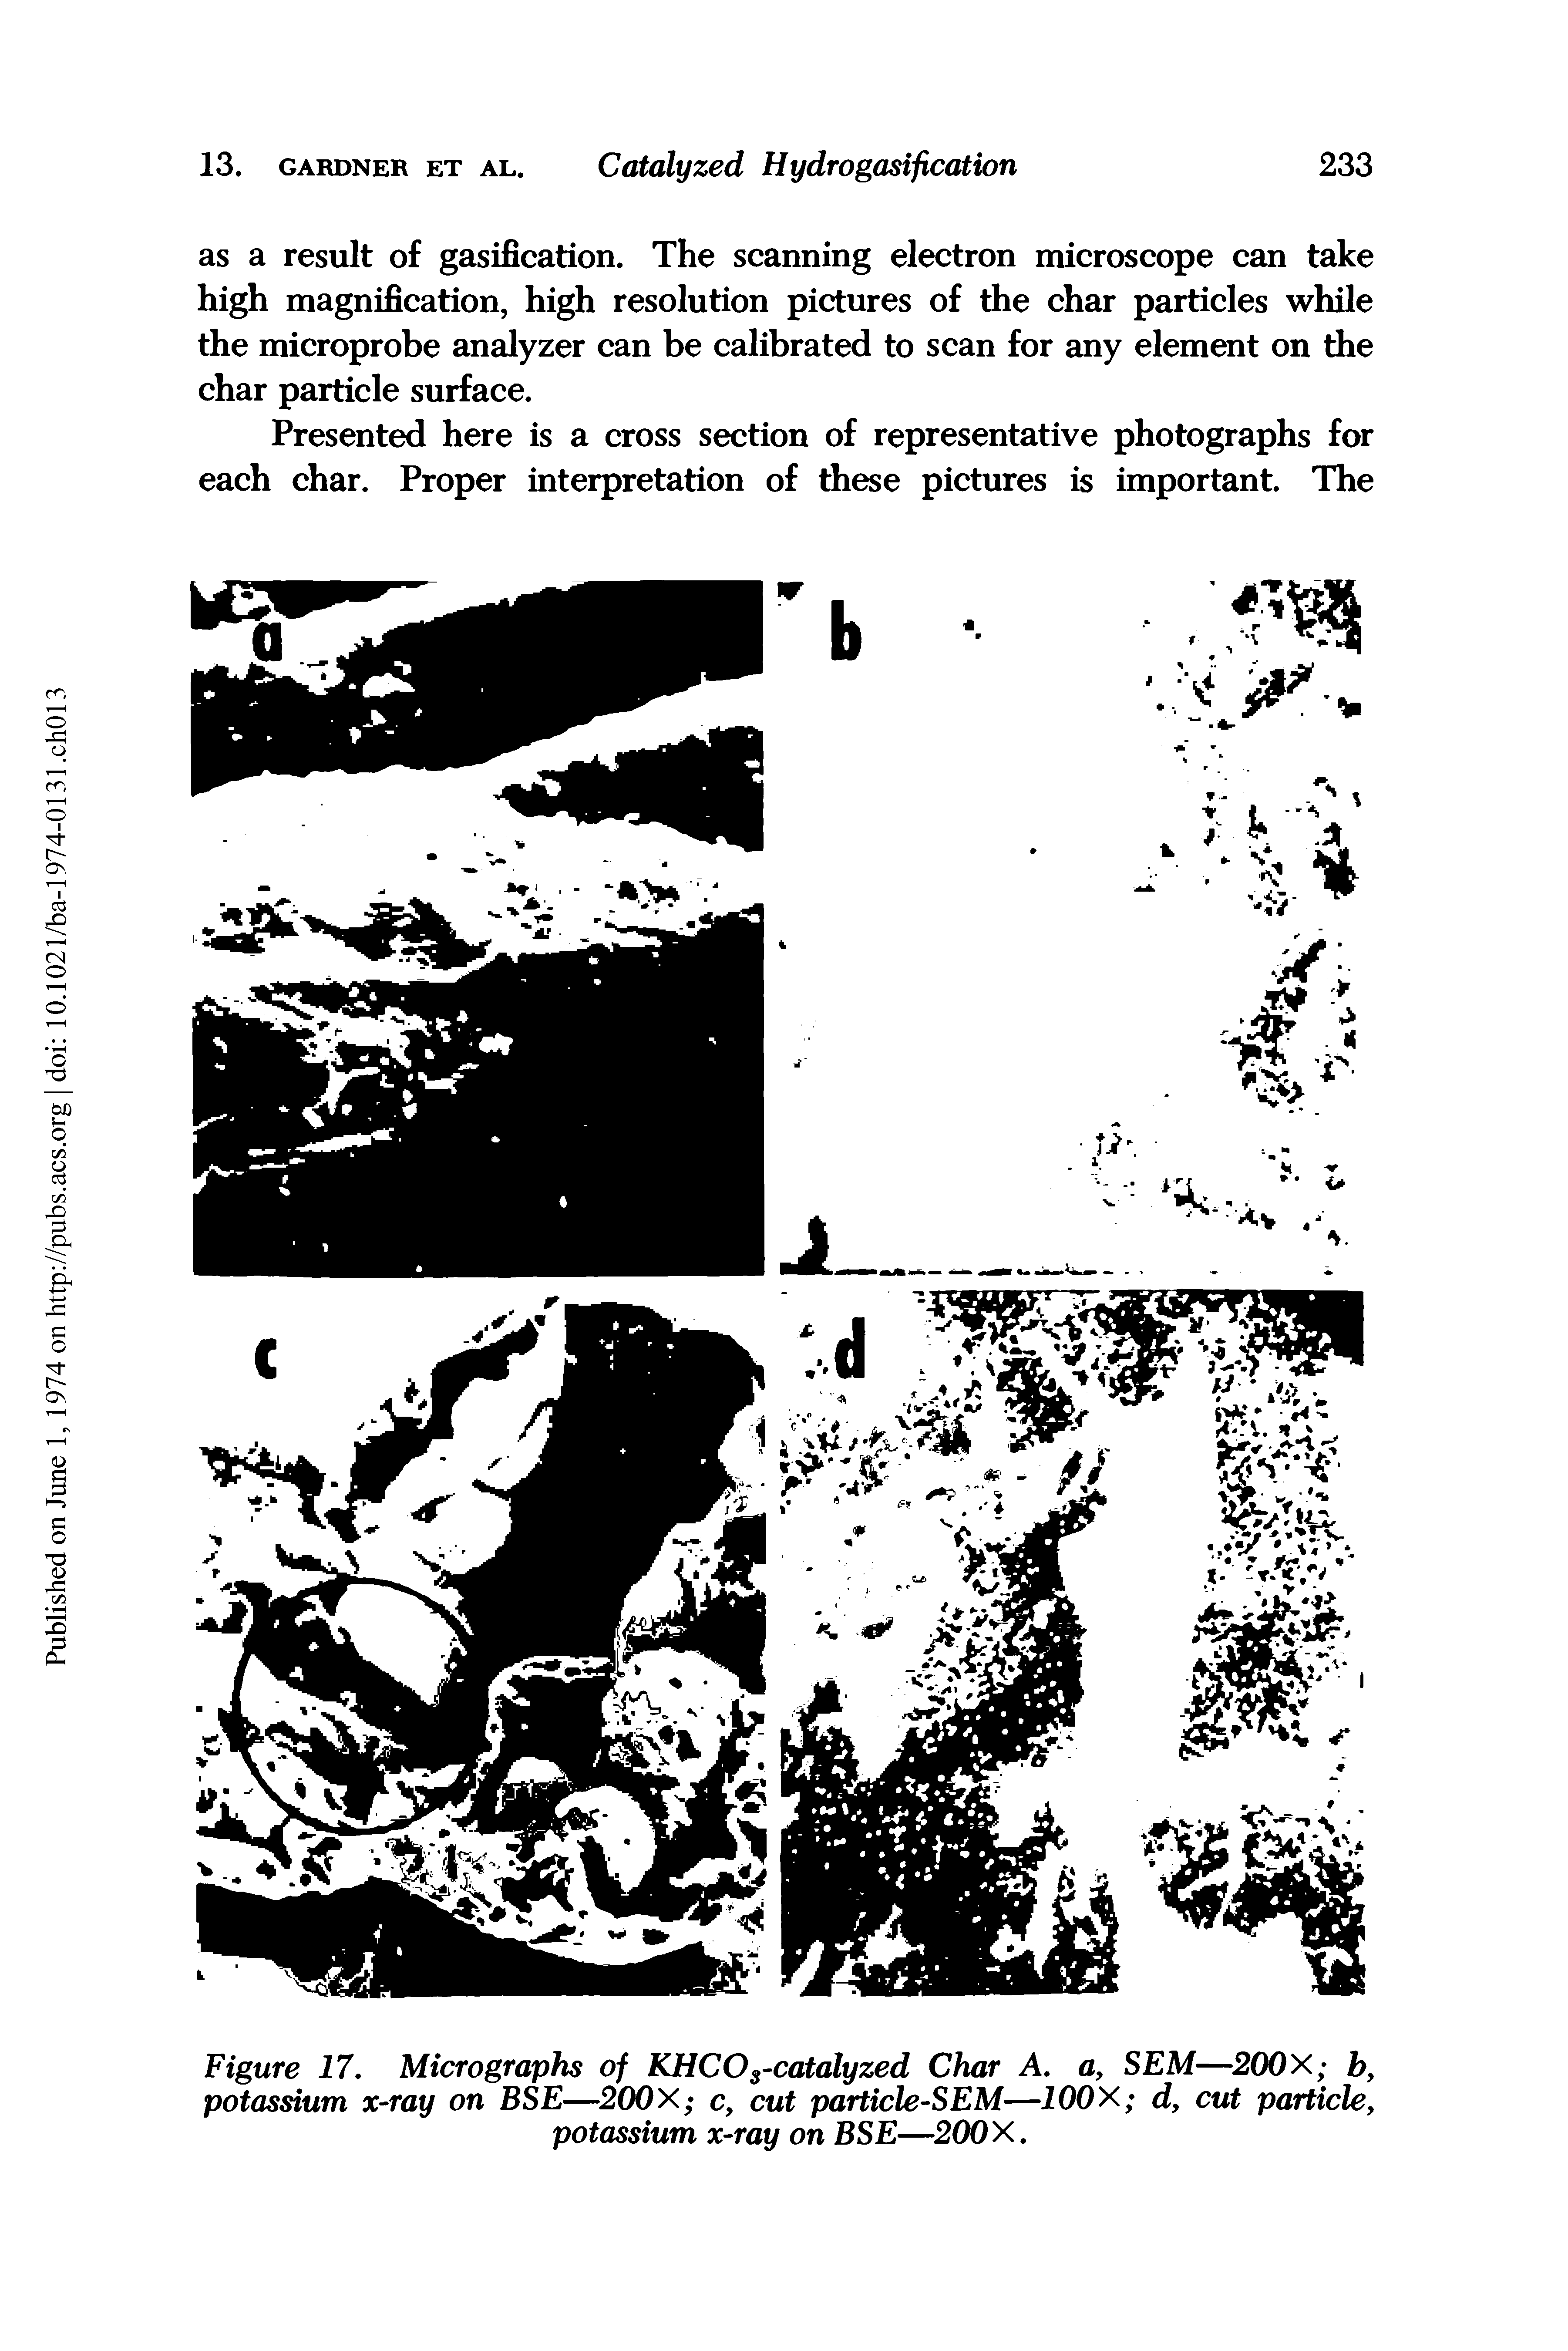 Figure 17. Micrographs of KHCO3-catalyzed Char A. a, SEM—200X b, potassium x-ray on BSE—200X c, cut particle-SEM—100X d, cut particle, potassium x-ray on BSE—200X.